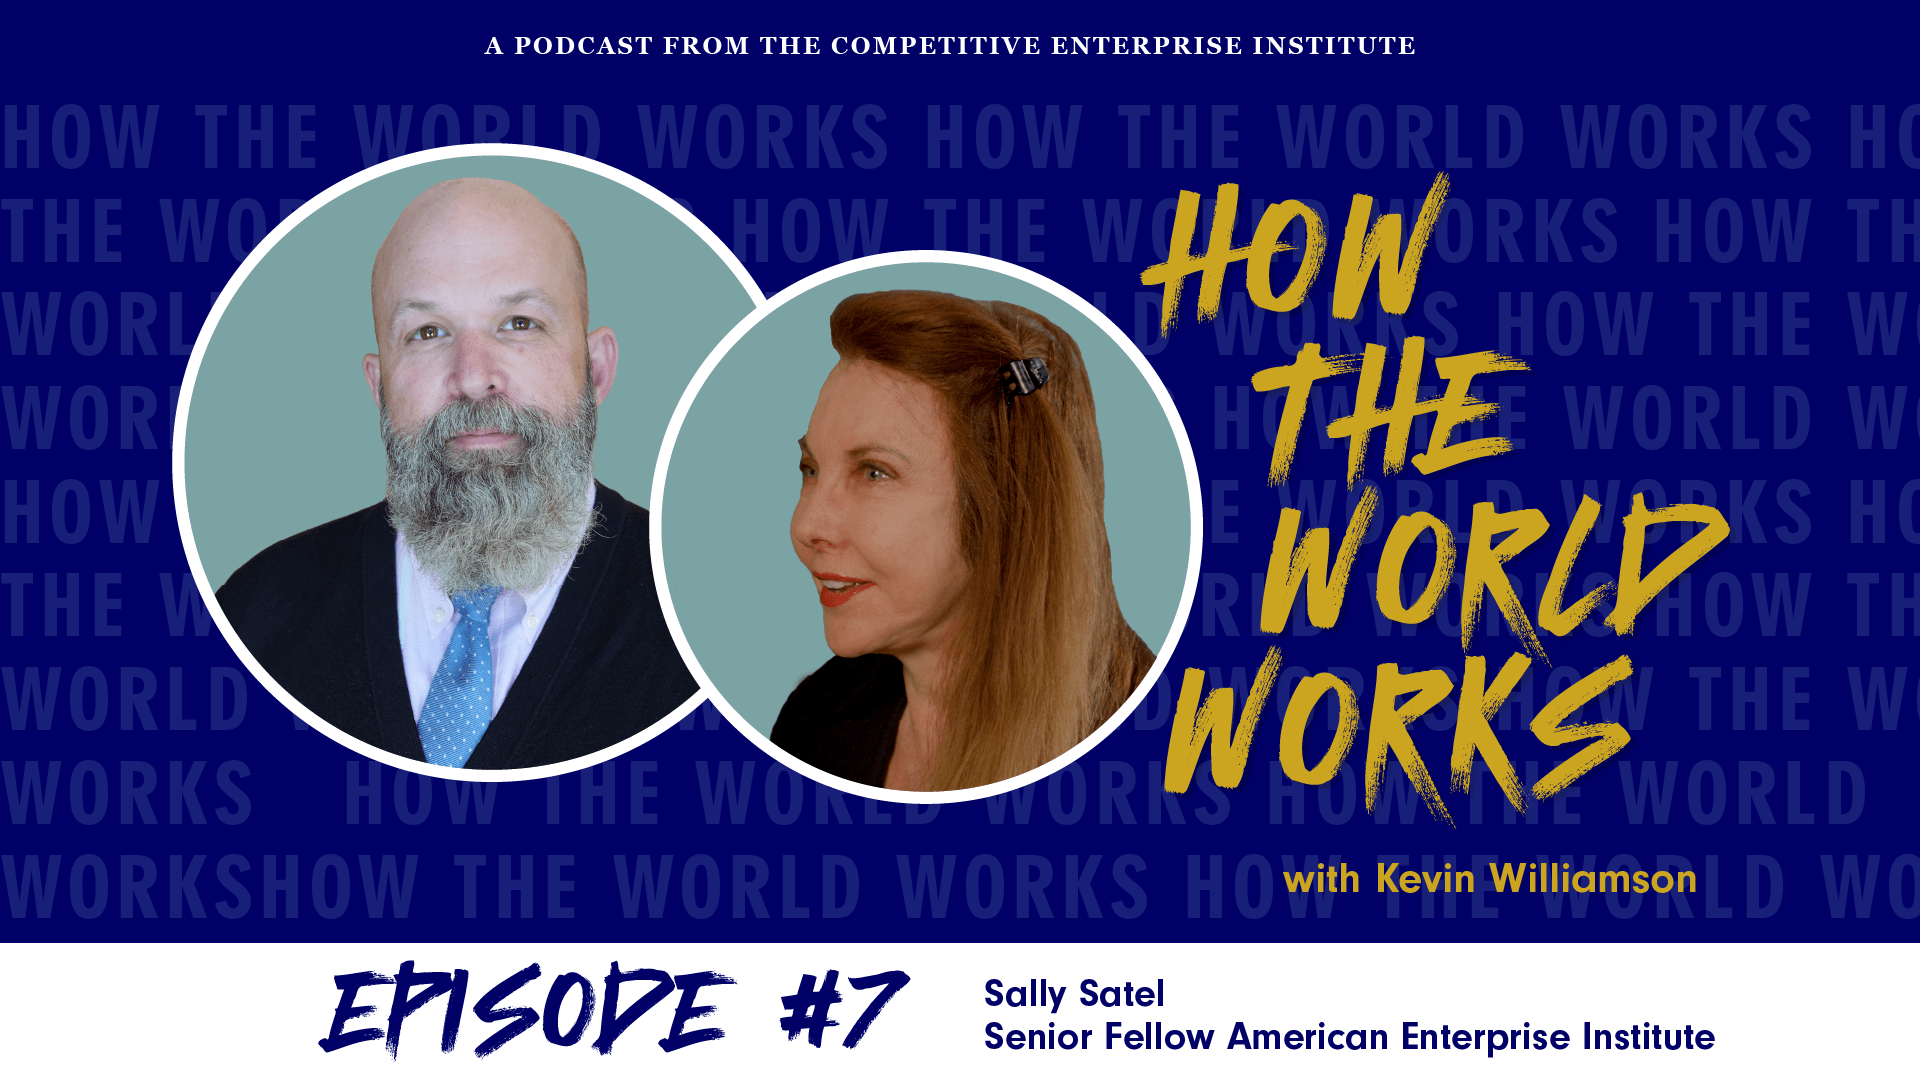 How the World Works Podcast with Sally Satel